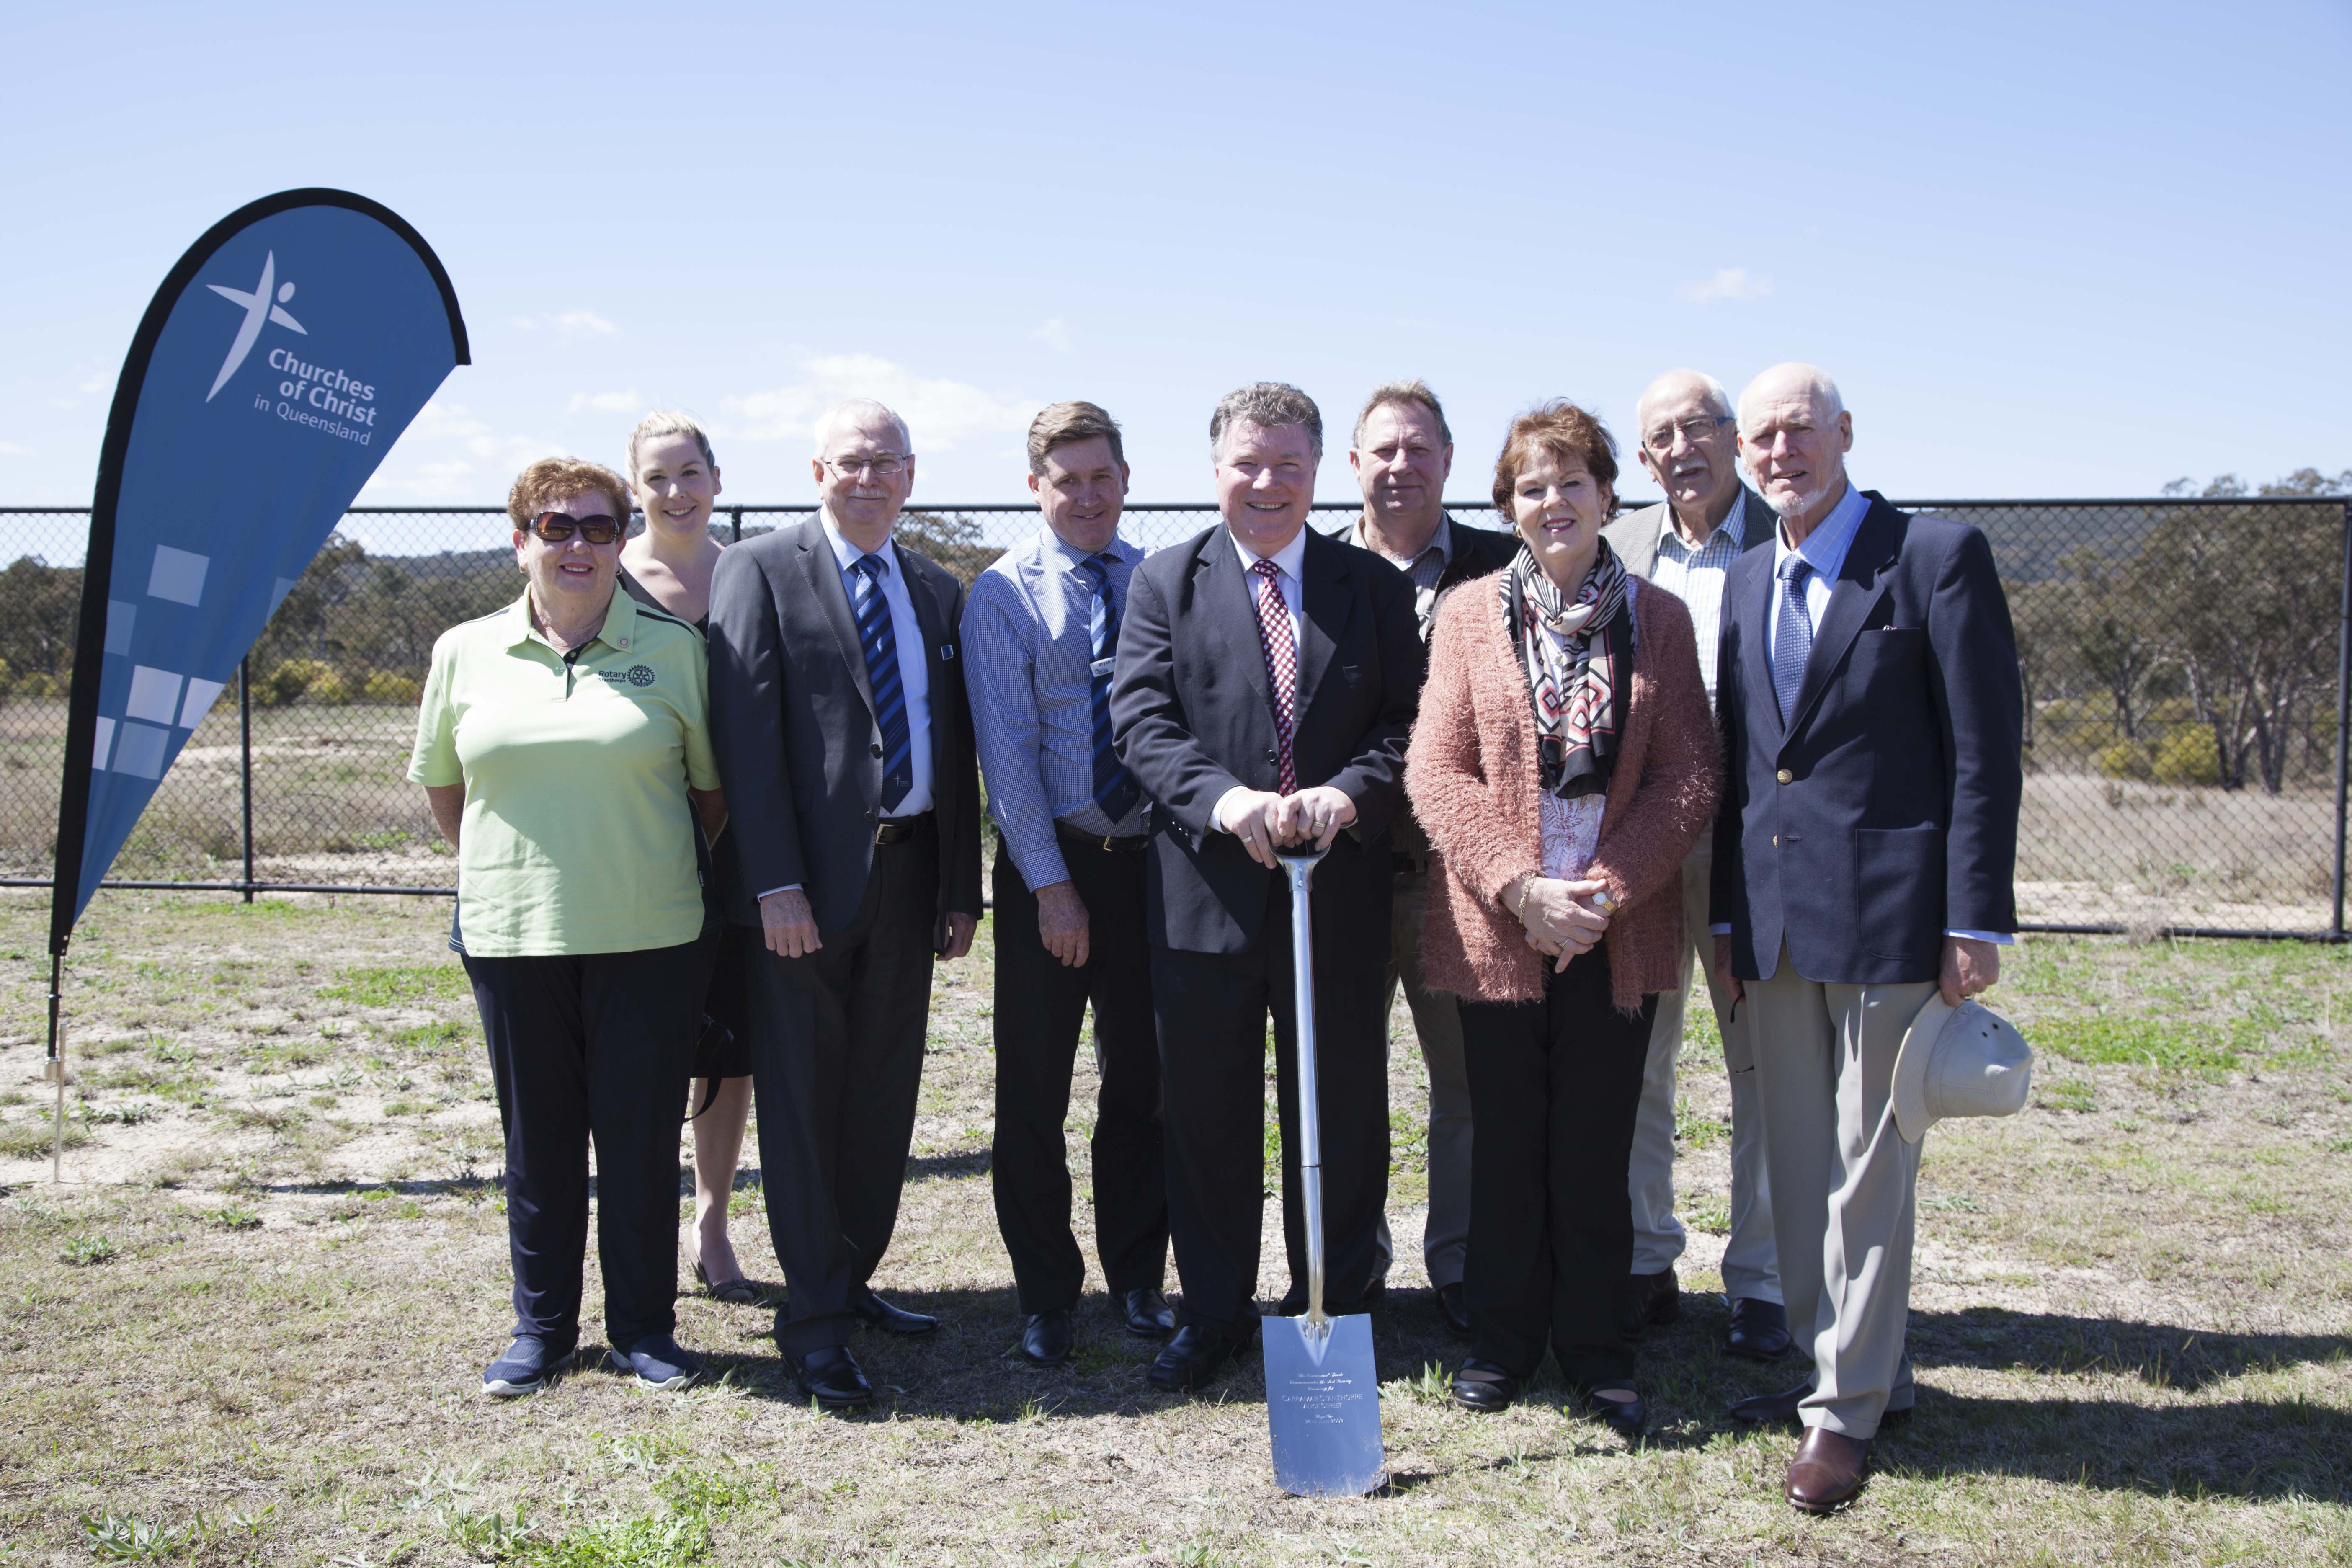 Churches of Christ Care Sod Turning Sees Seniors Support Extended